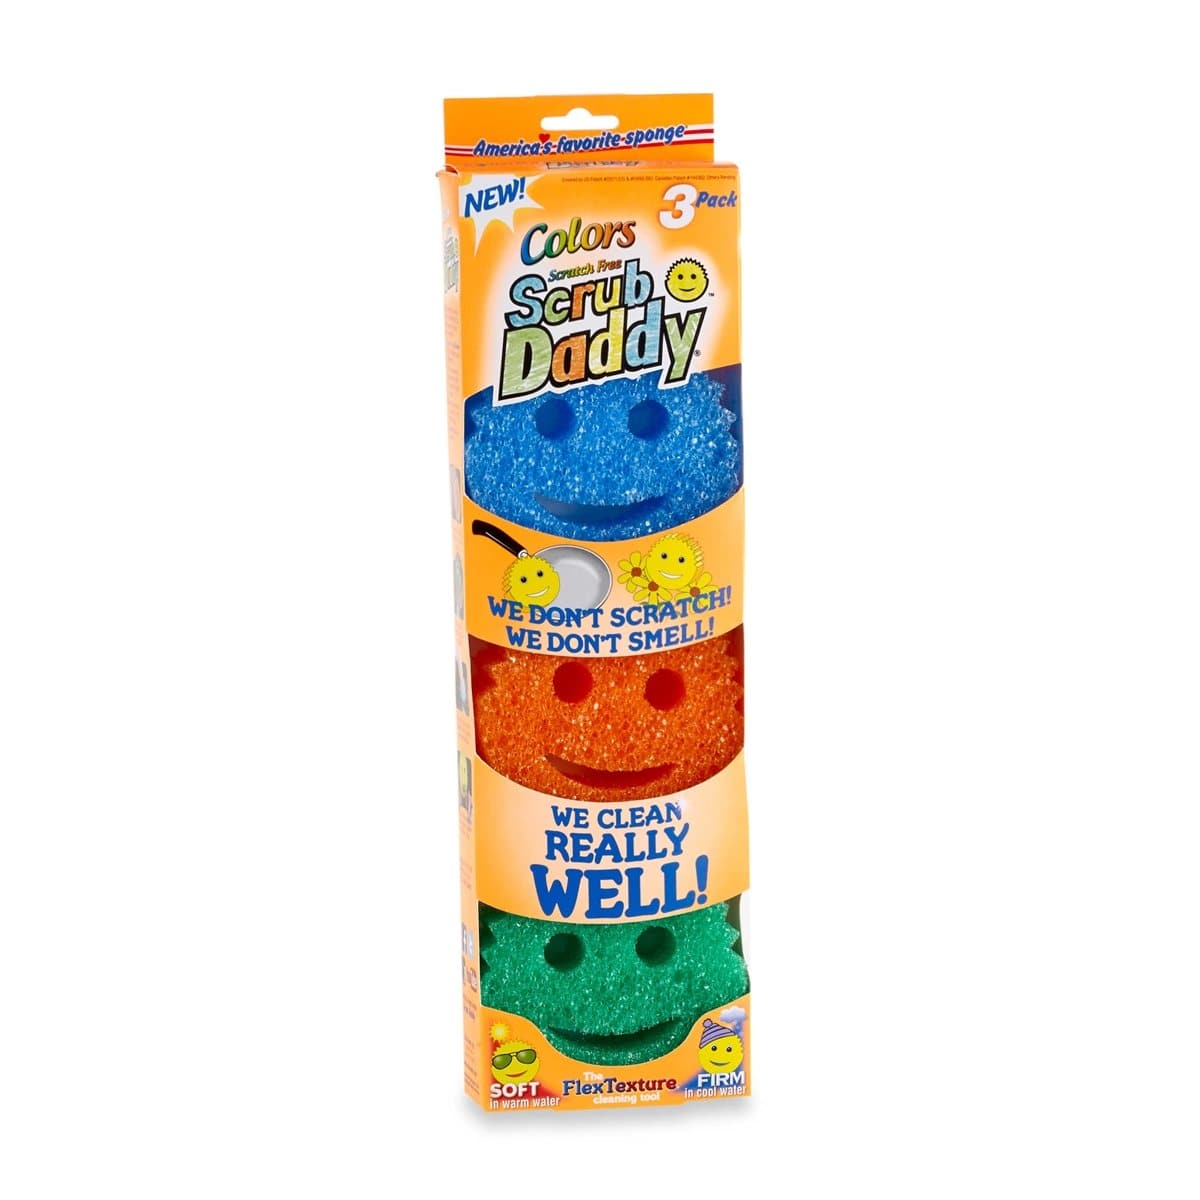 Kitchen & Company Cleaning Tools Scrub Daddy 3-Piece Color Sponges Set